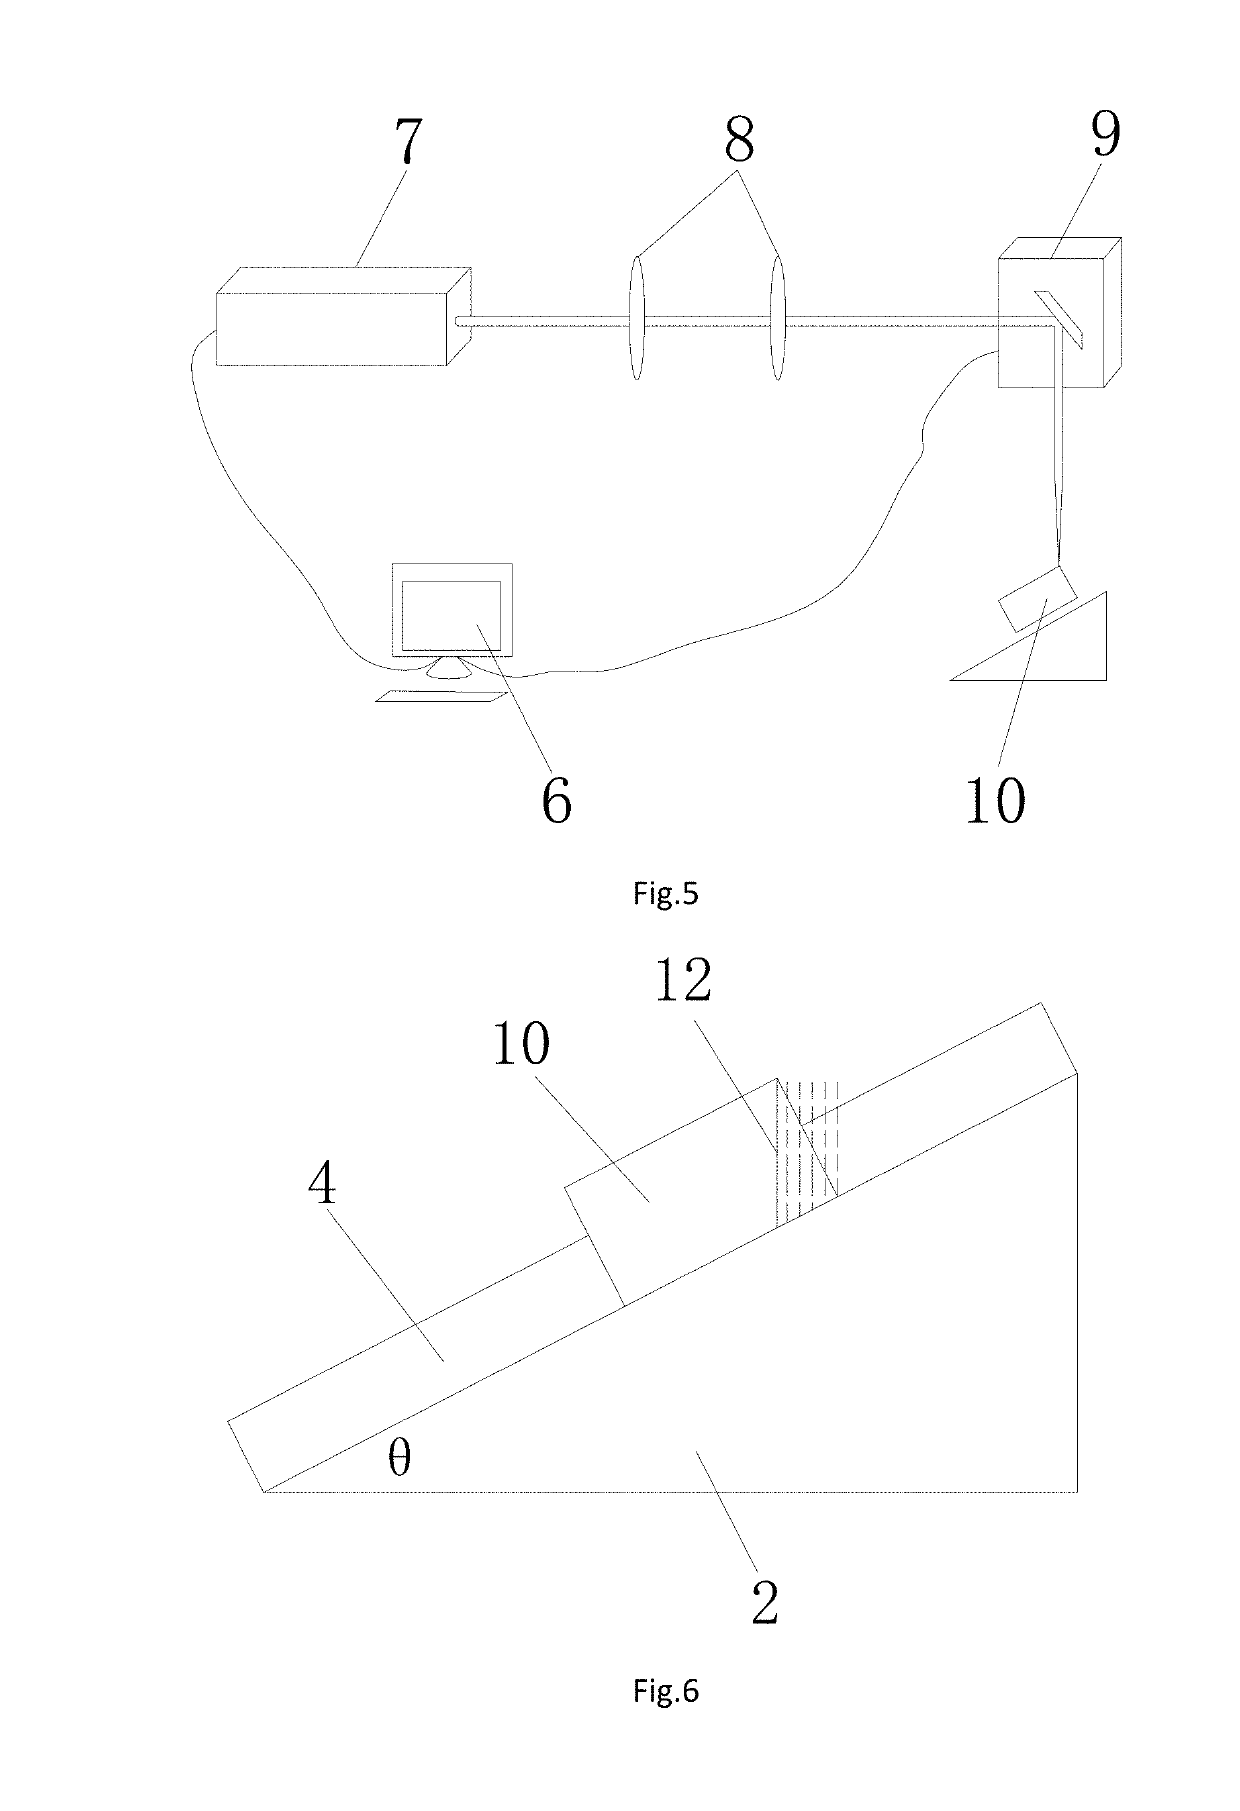 Work fixture, device and method for machining the cutting edge of cutting tools